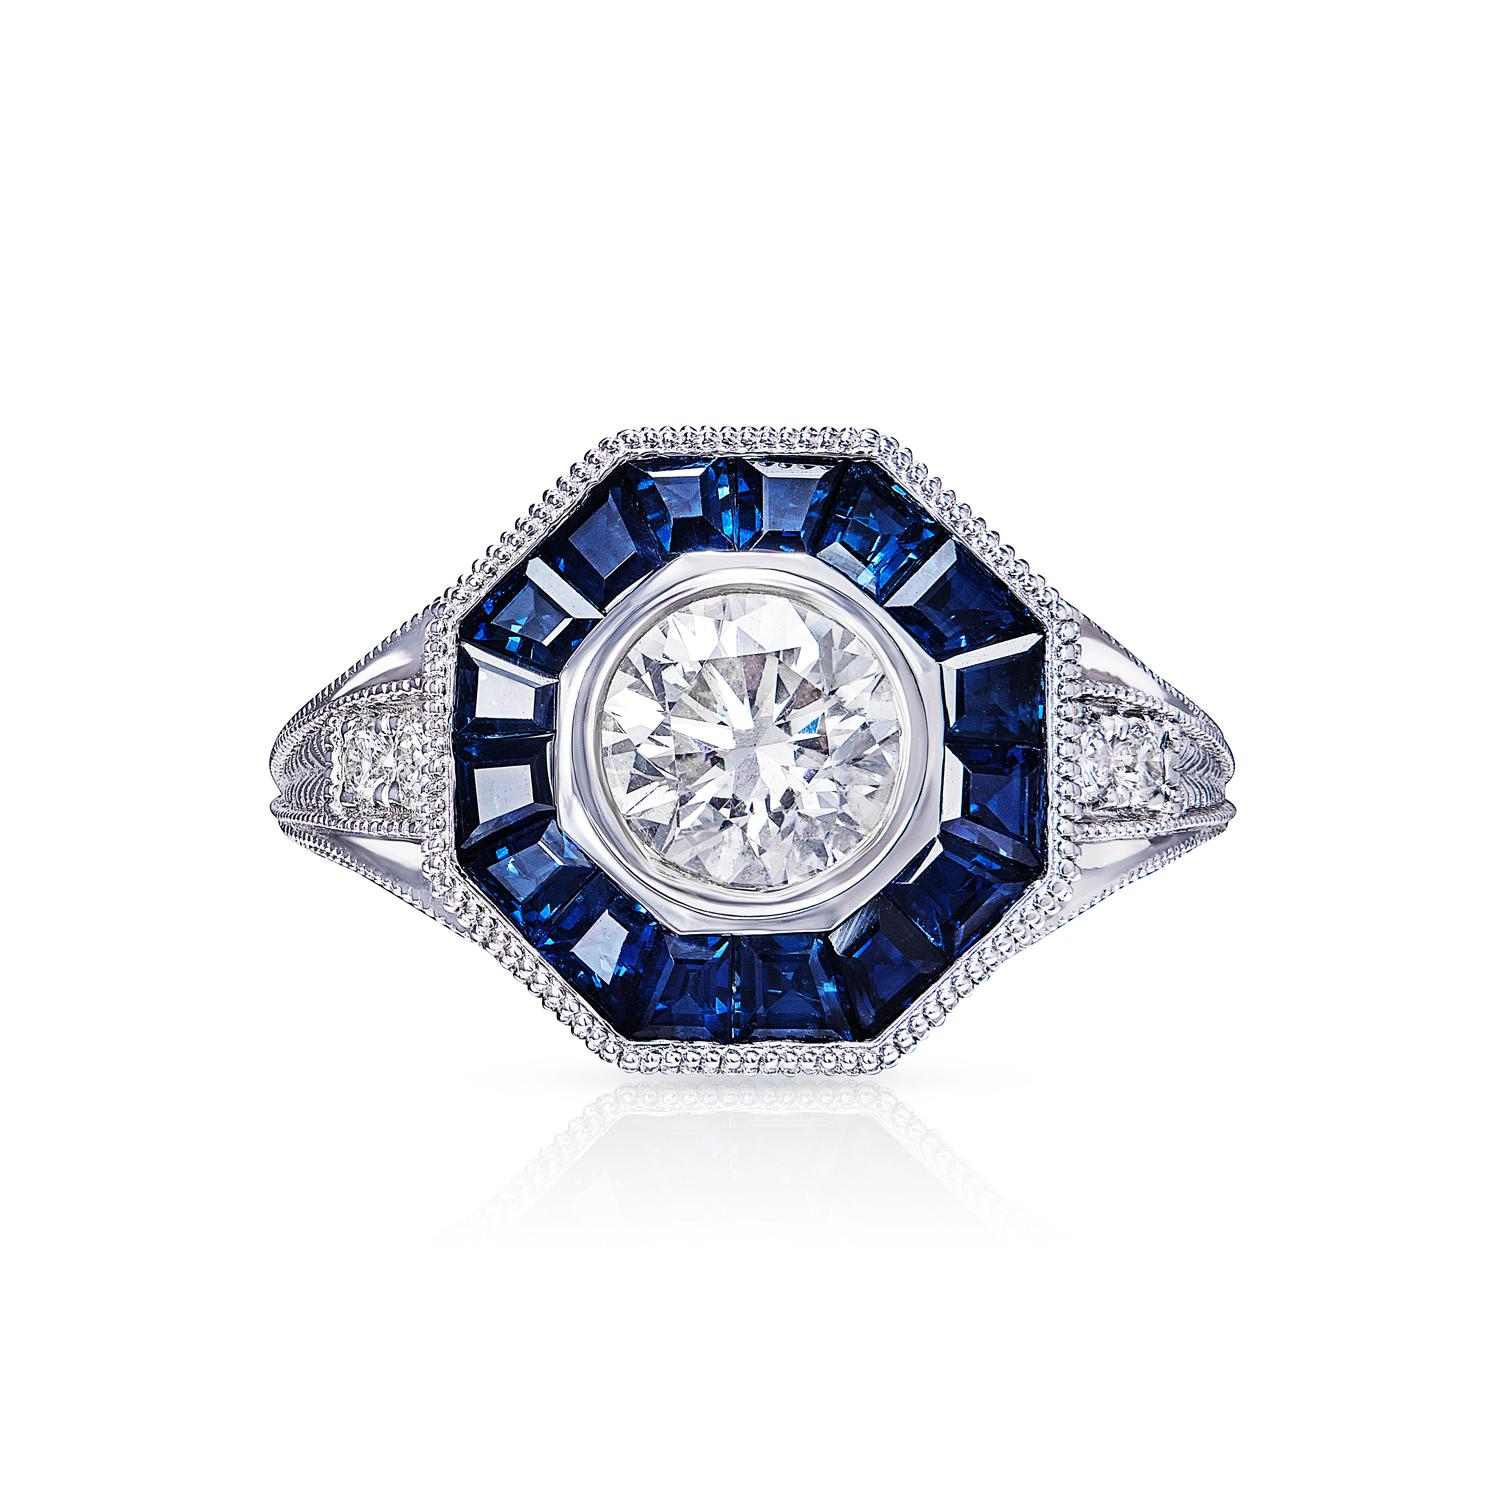 This elegant  vintage style octagon diamond ring is certified, ensuring that it meets the highest standards of quality. The round centered diamond is set in a classic four-prong setting and is surrounded by a halo of smaller diamonds, which enhances